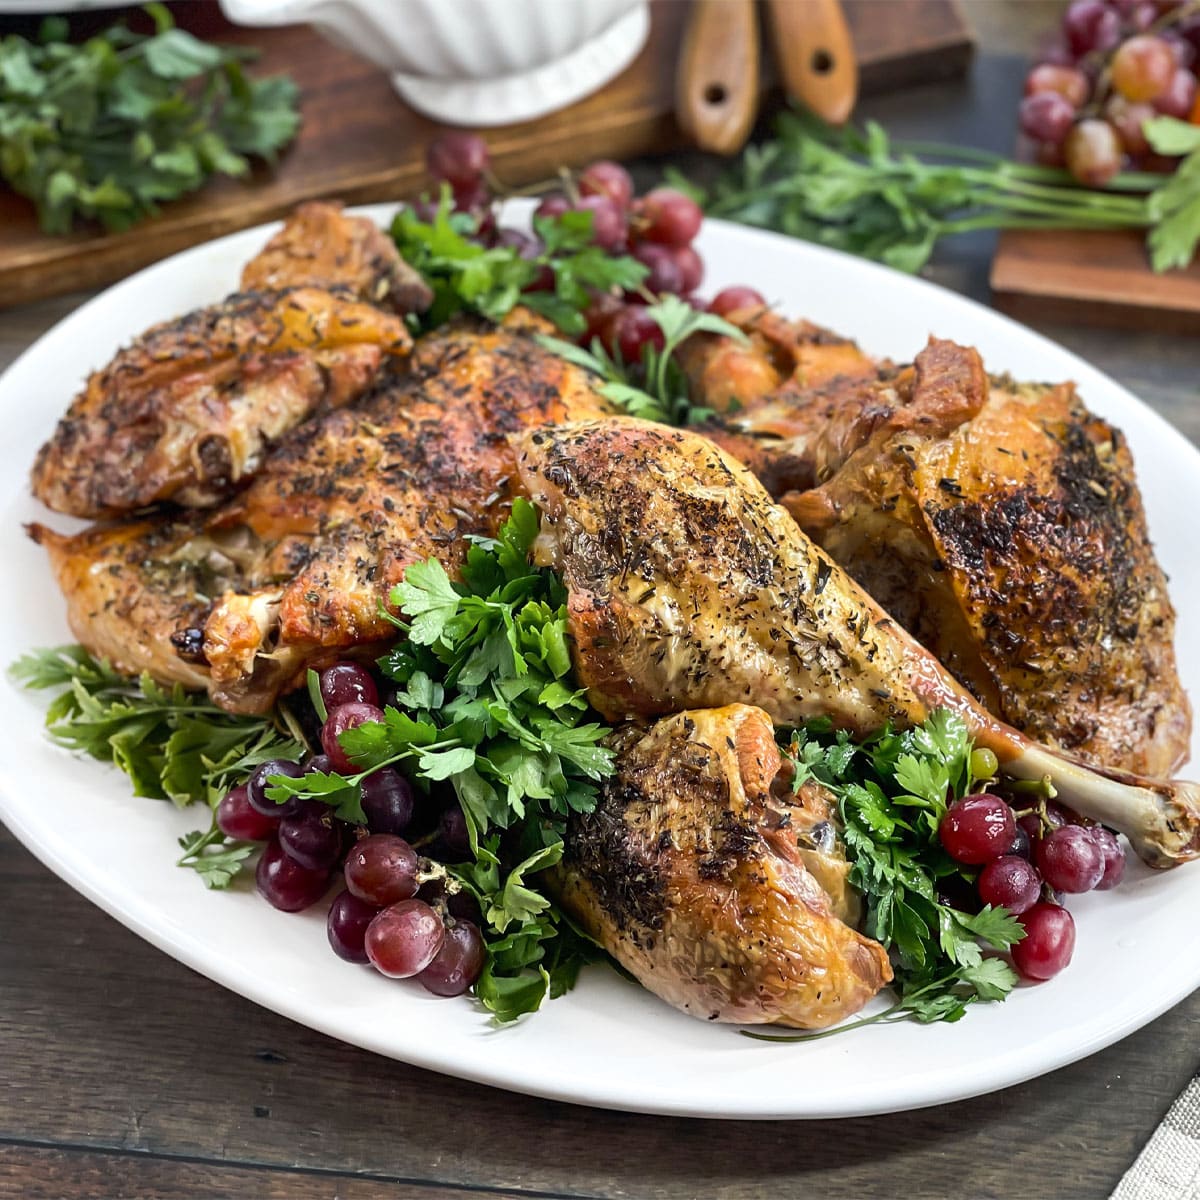 Roasted turkey pieces on a white platter with greens and grapes.